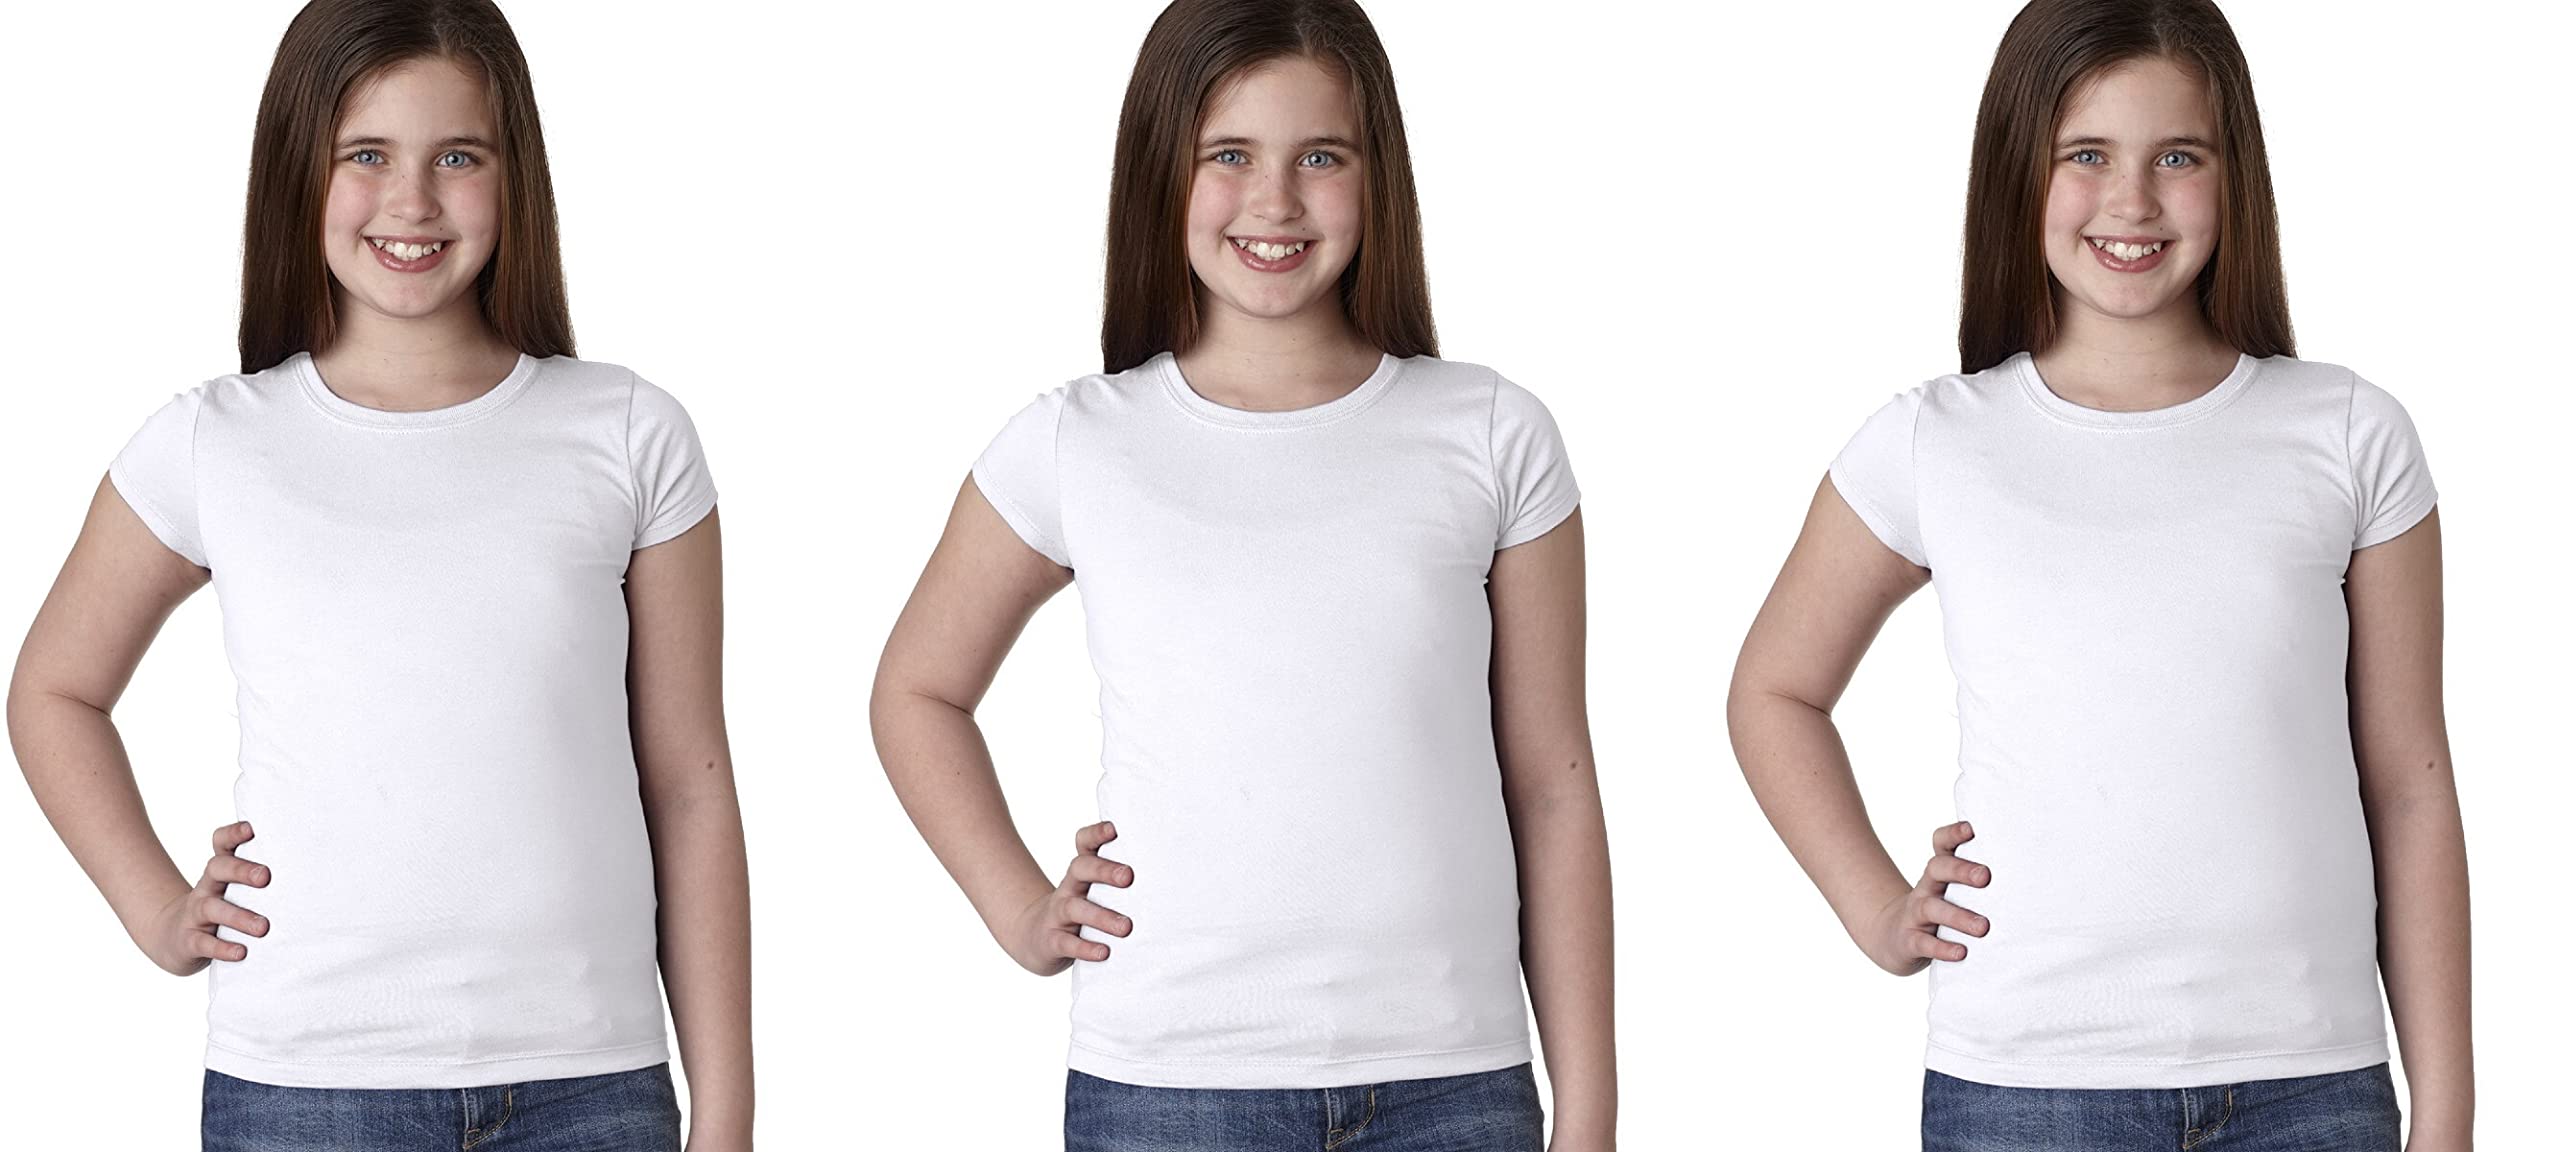 Clementine Apparel Girl's 3 Pack Short Sleeve T Shirts Crew Neck Casual Soft Tees Top - Sizes 3-16